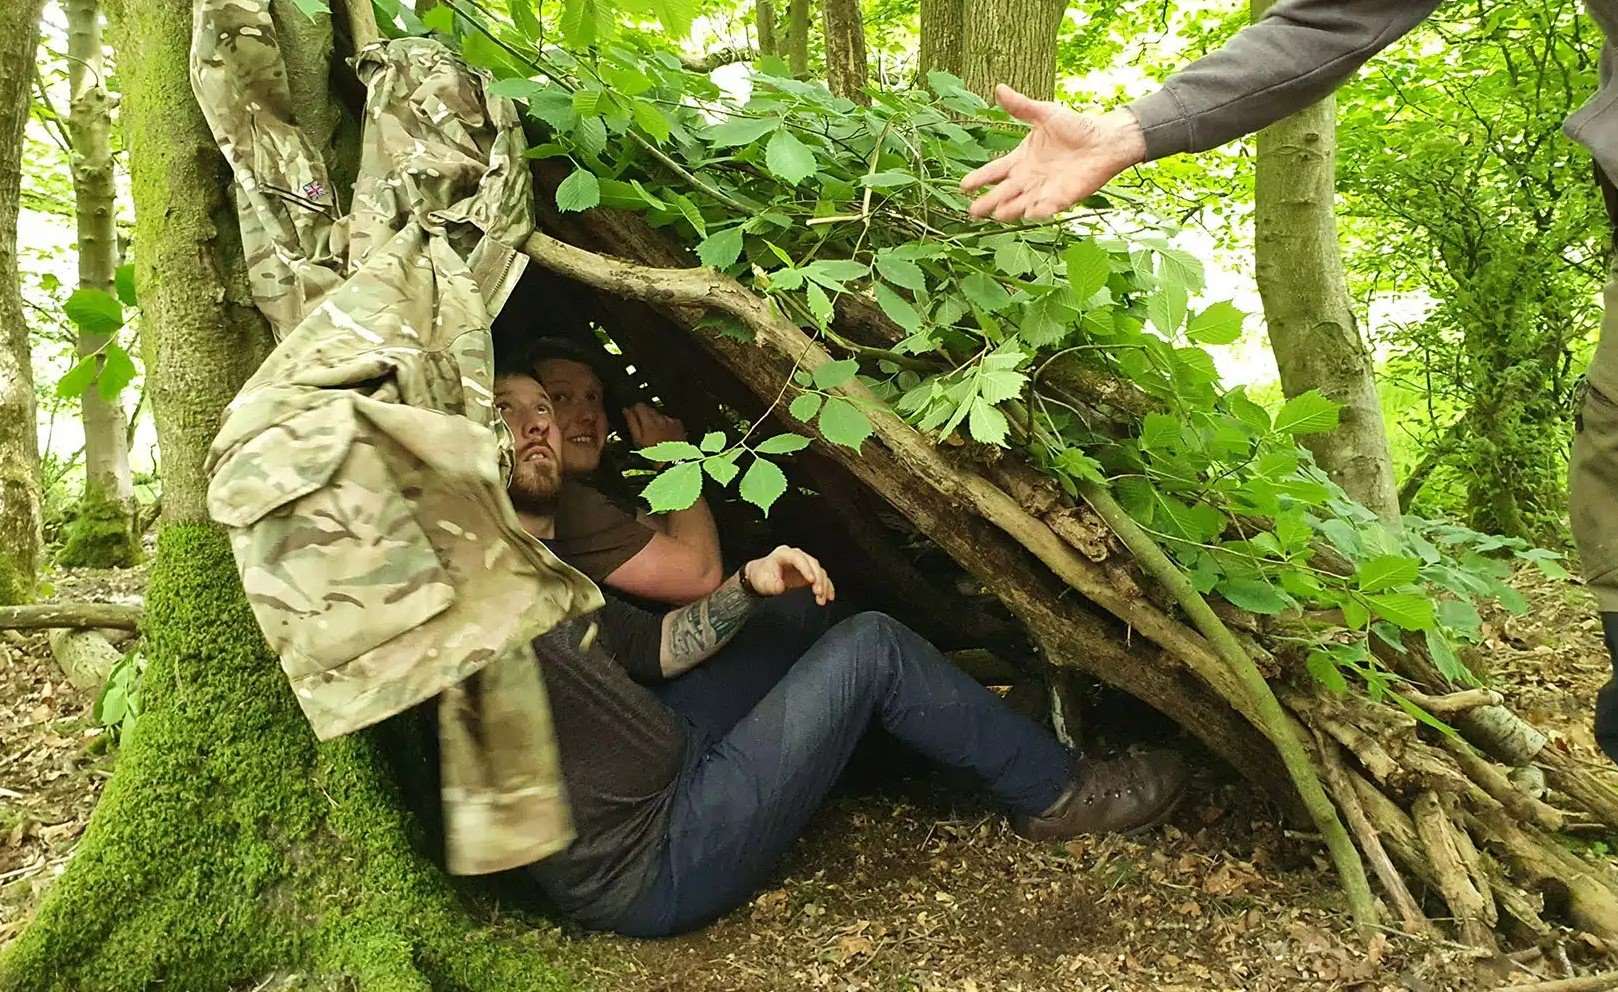 15 Enigmatic Facts About Bushcraft - Facts.net